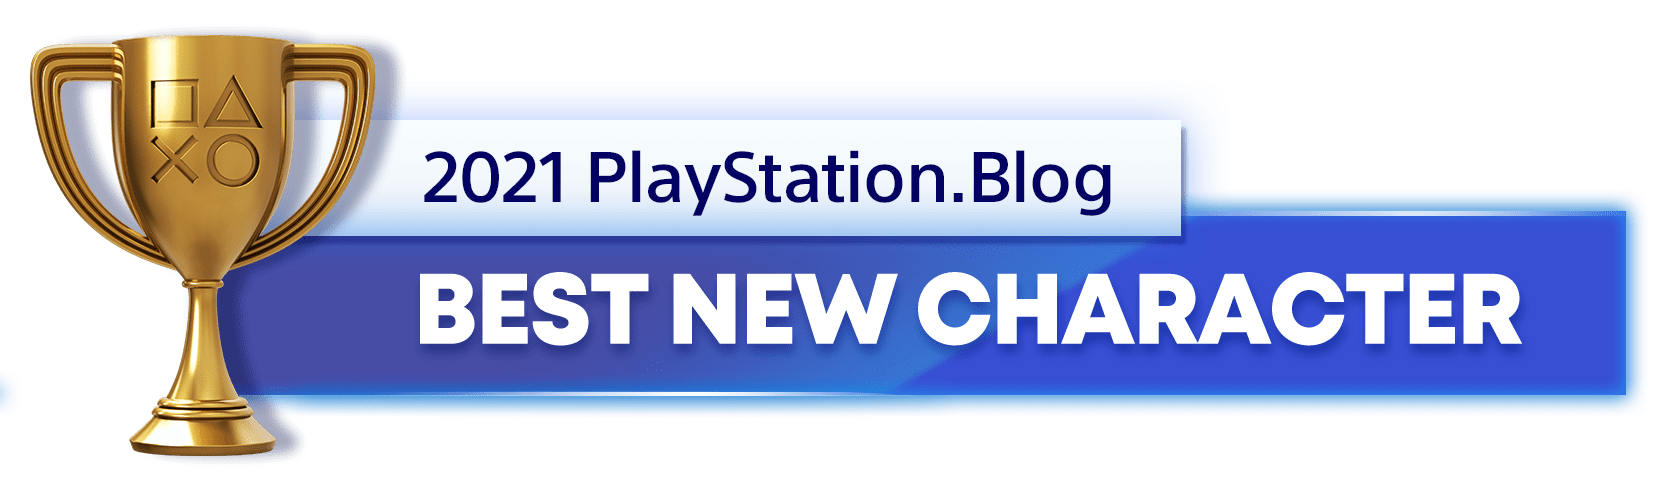 Game One - PlayStation Showcase 2021: All the announcements - Blog